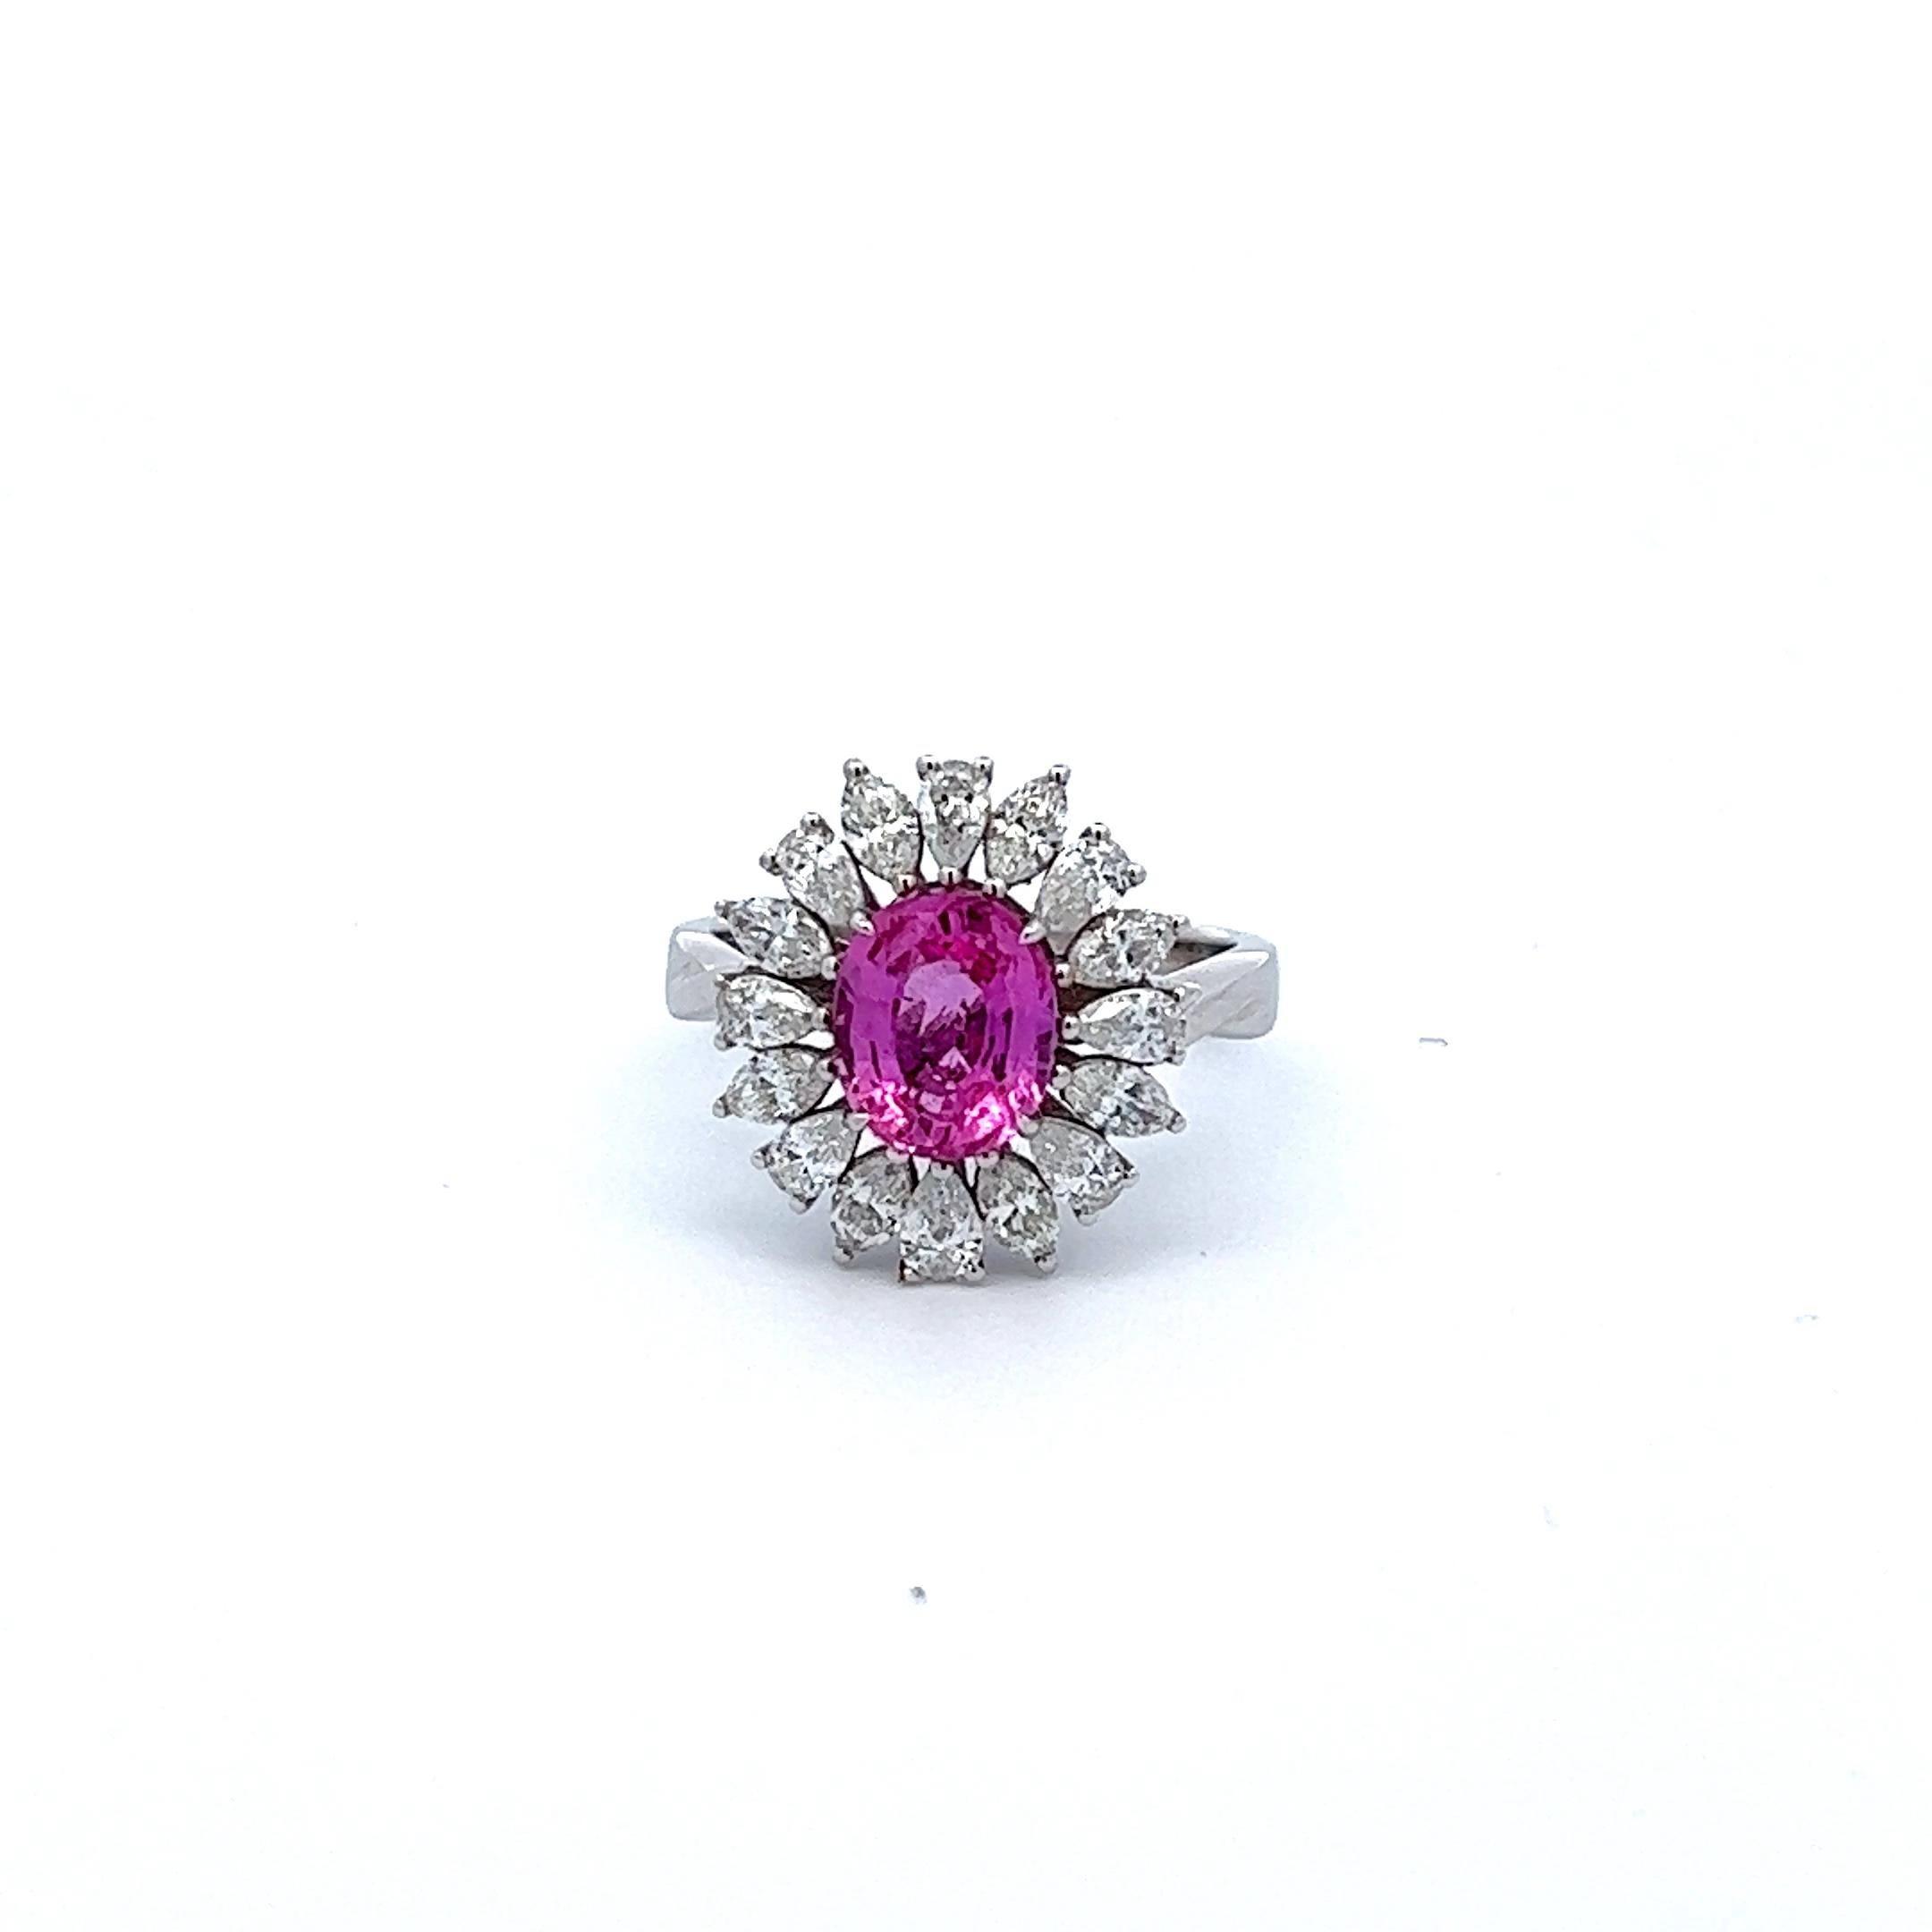 Introducing the Cherry Blossom Pink Sapphire and Diamond Ring, a stunning piece of jewelry inspired by the beauty and grace of Japanese cherry blossoms. This exquisite ring features a rare, natural oval-shaped pink sapphire weighing 2.27 carats,